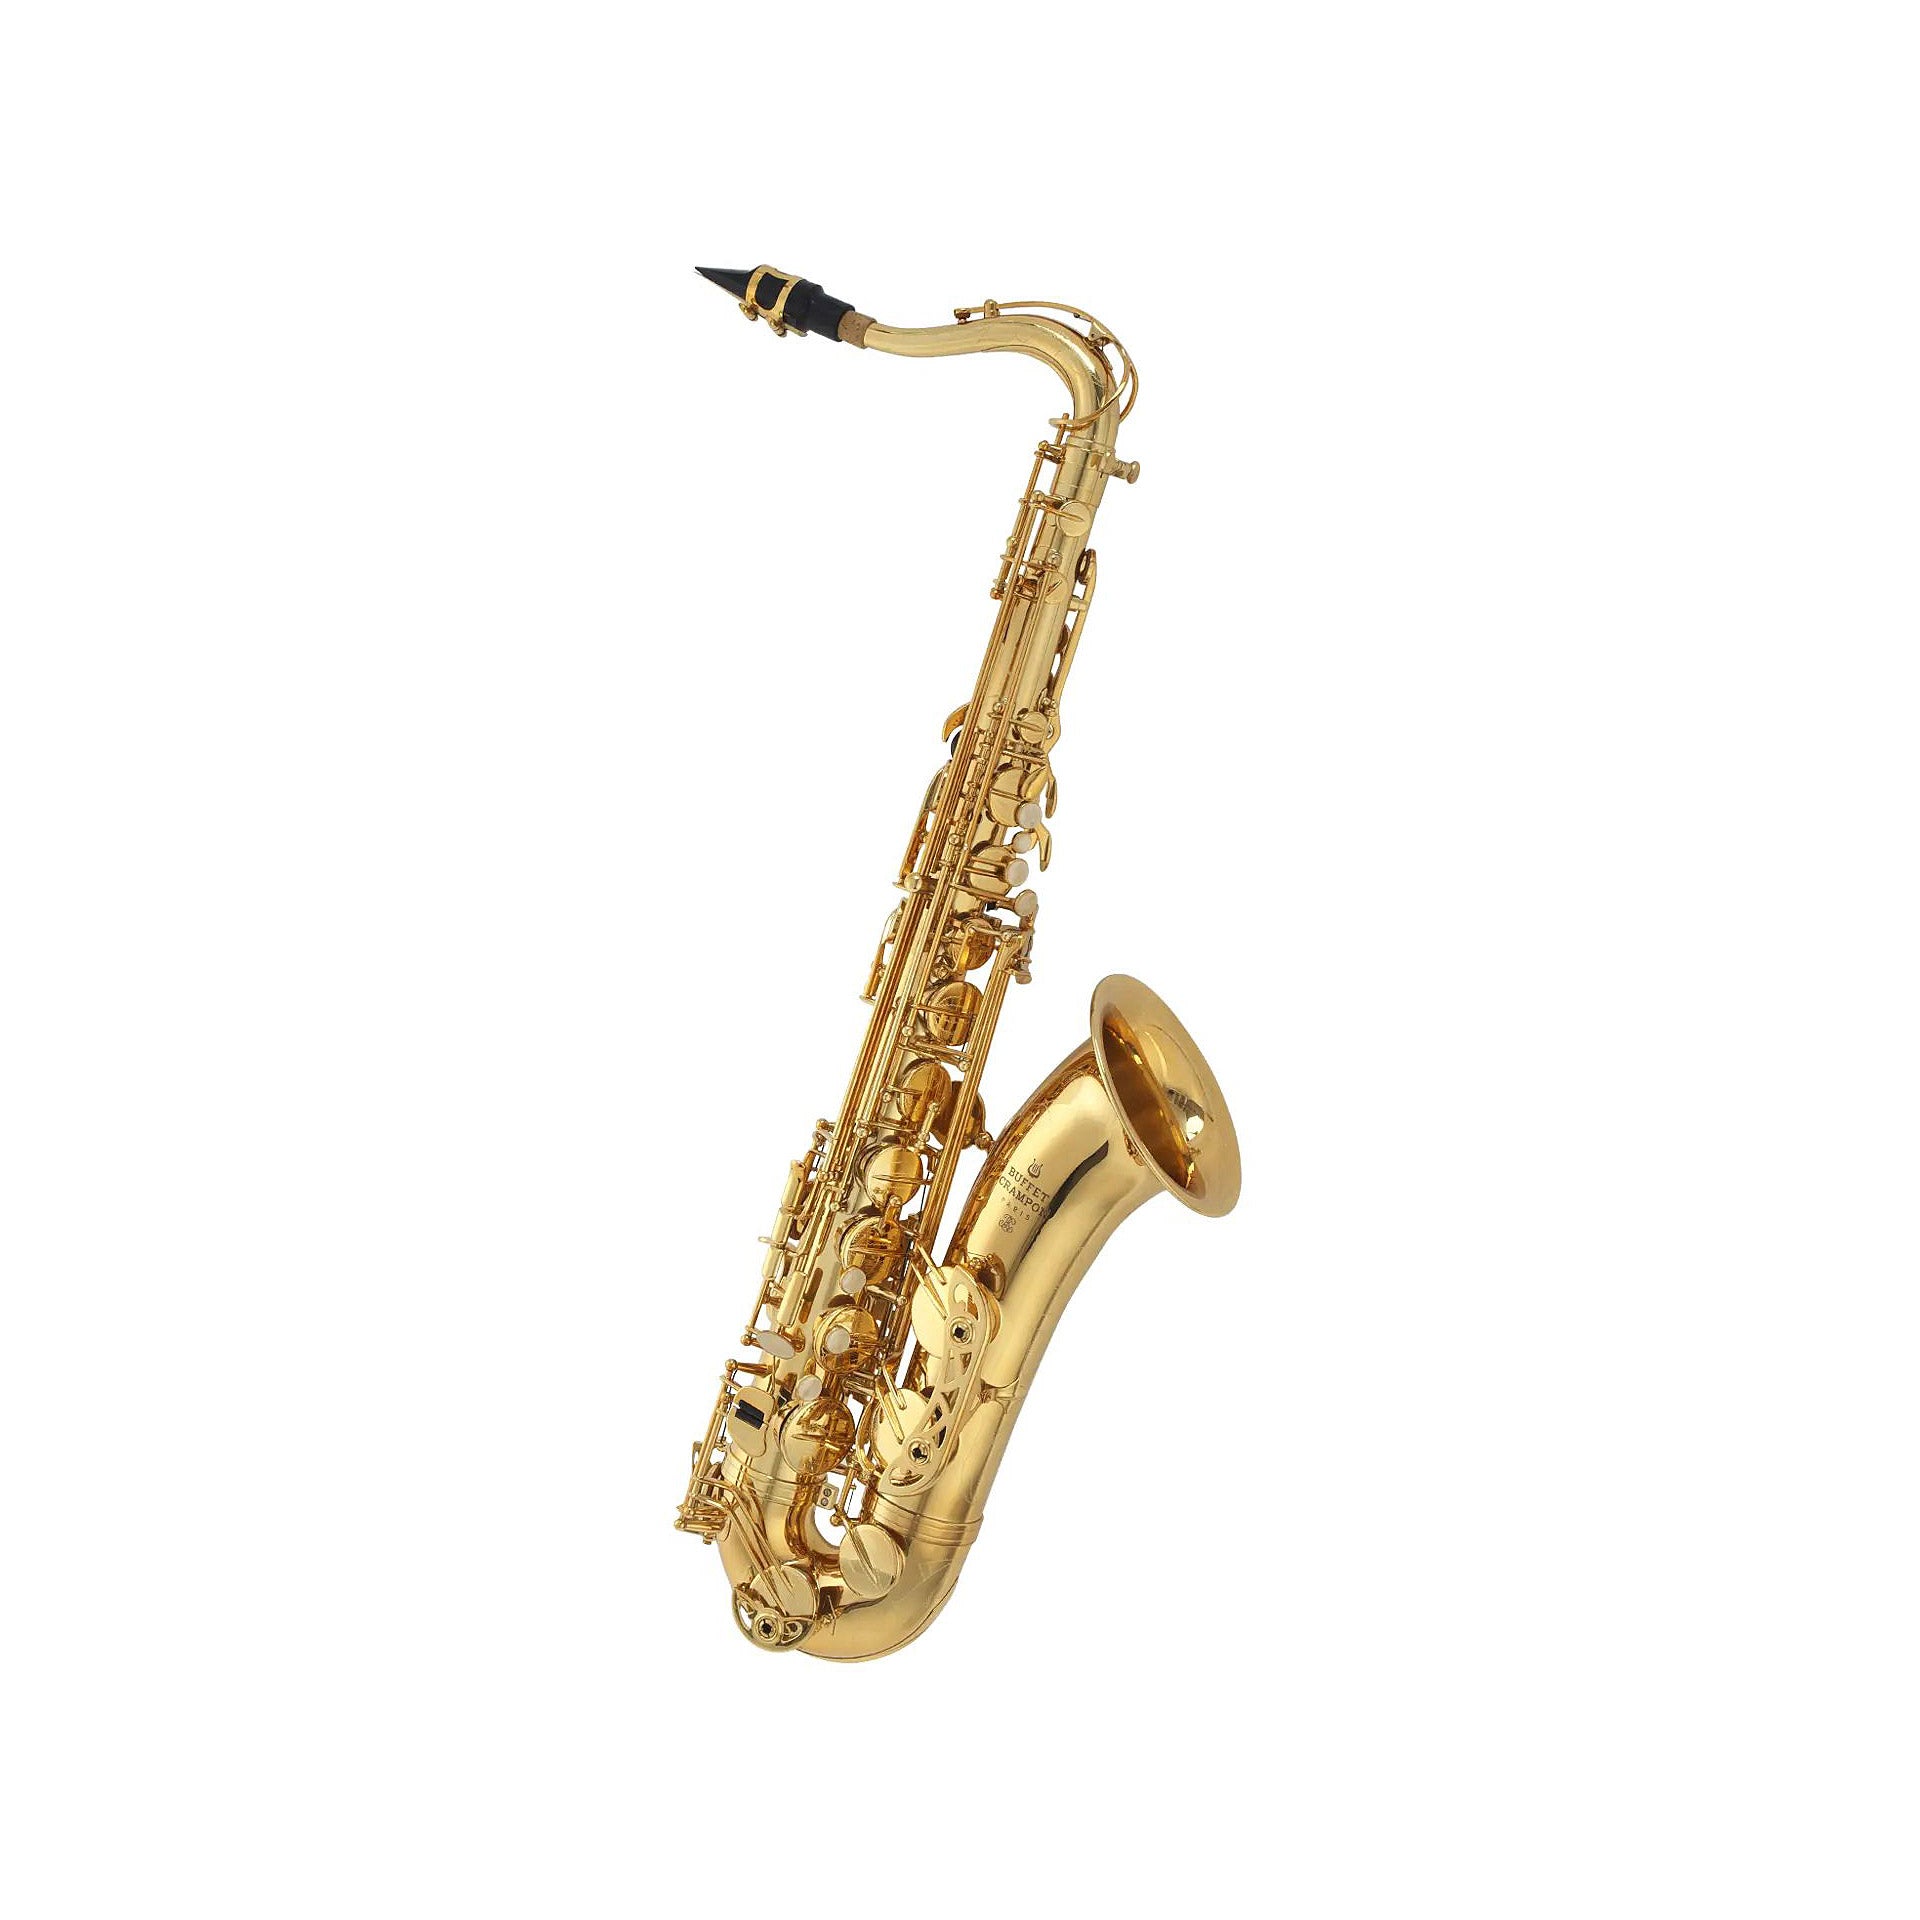 Buffet Crampon 400 Series Professional Tenor Saxophone In Gold Lacquer